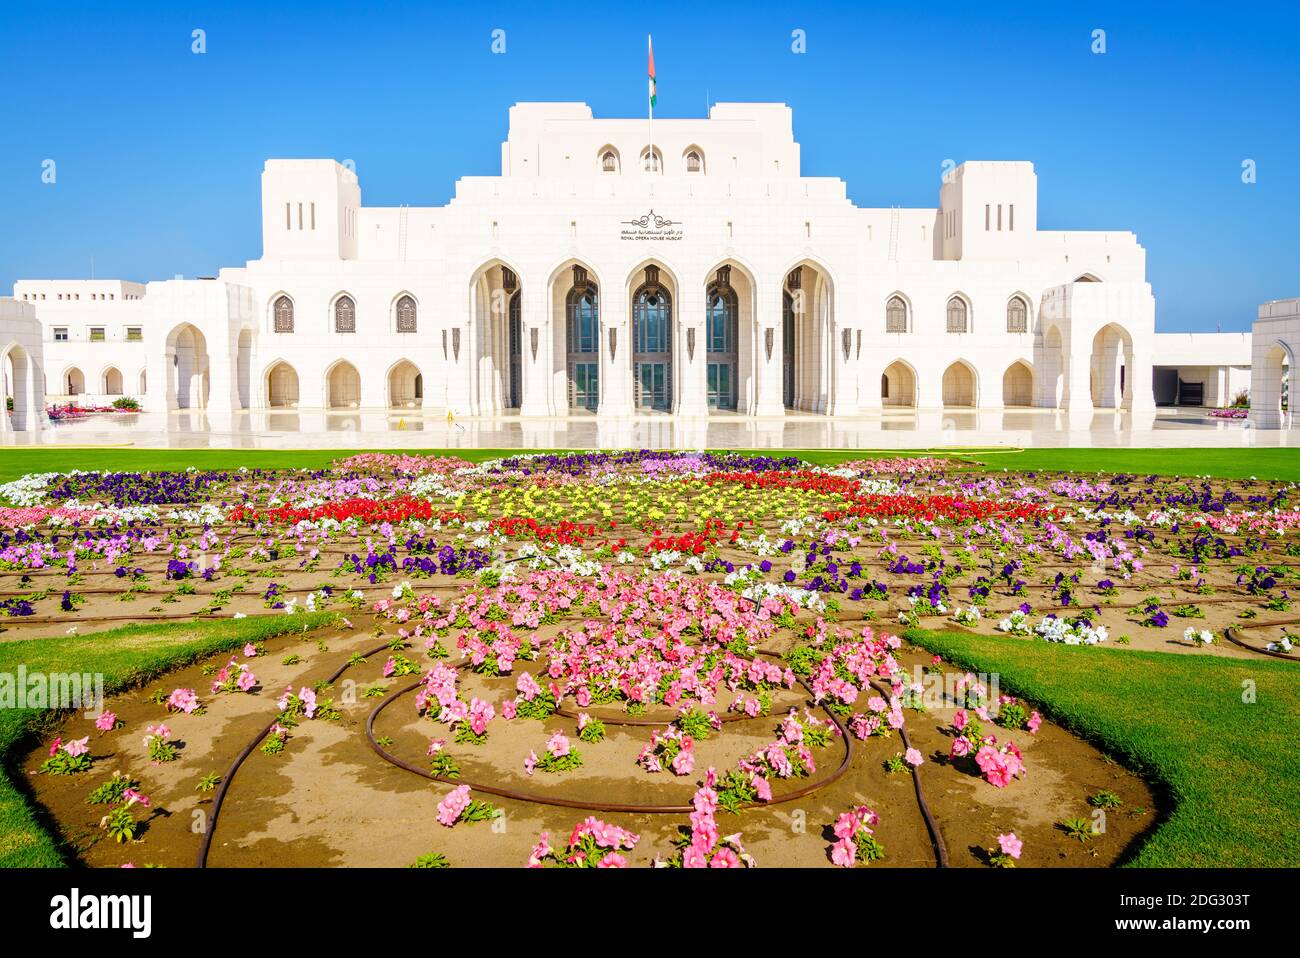 Muscat, Oman, December 3, 2016: Beautiful Royal Opera House and grounds in Muscat, Oman Stock Photo